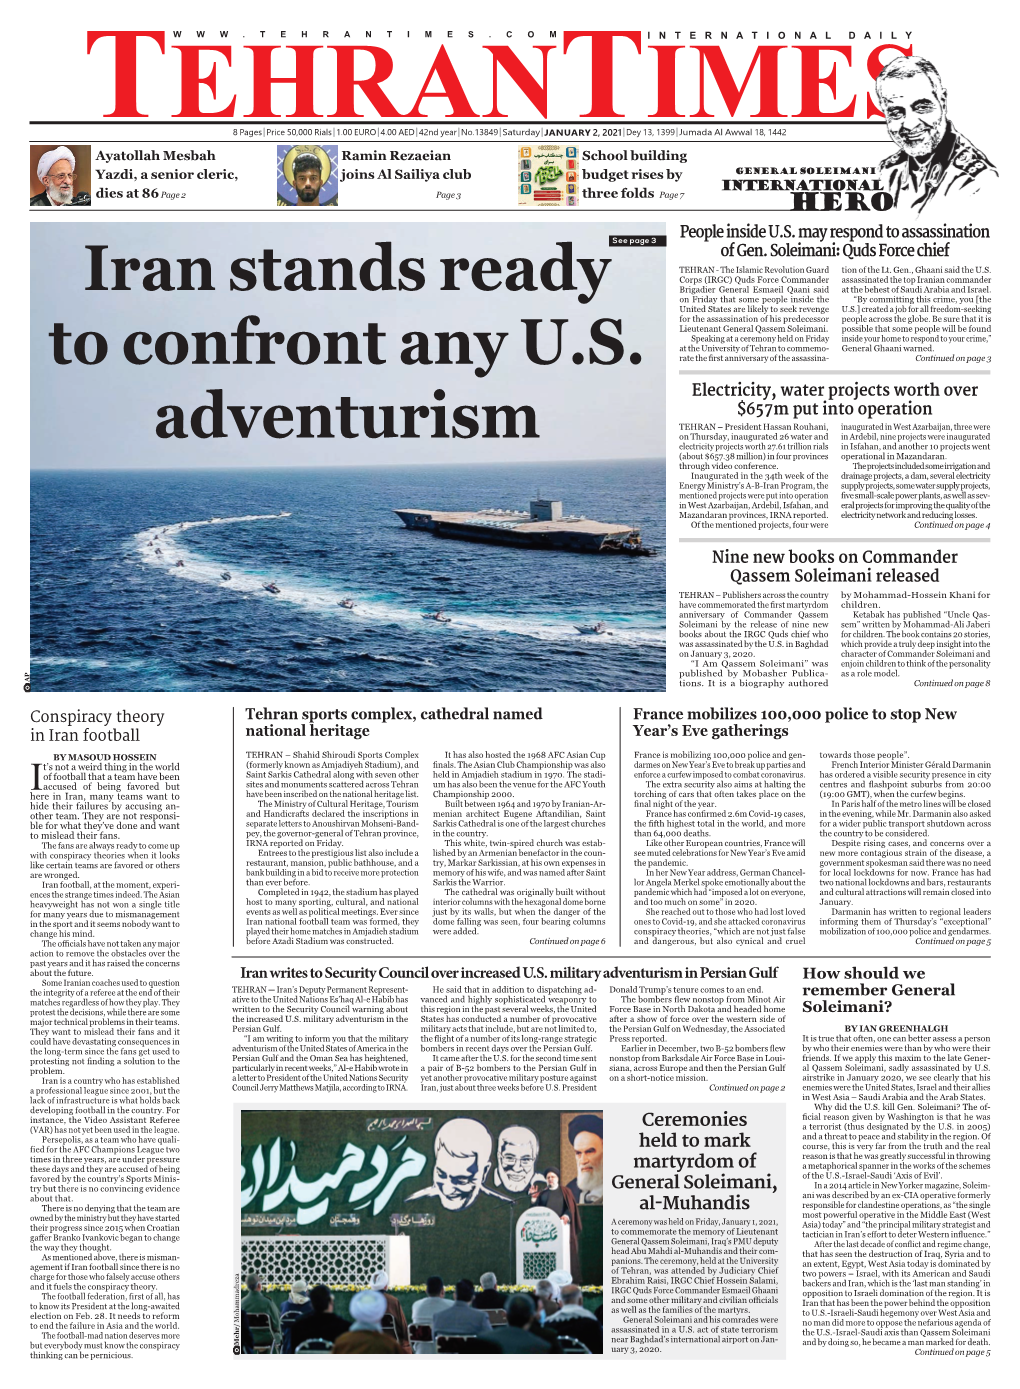 Iran Stands Ready to Confront Any U.S. Adventurism